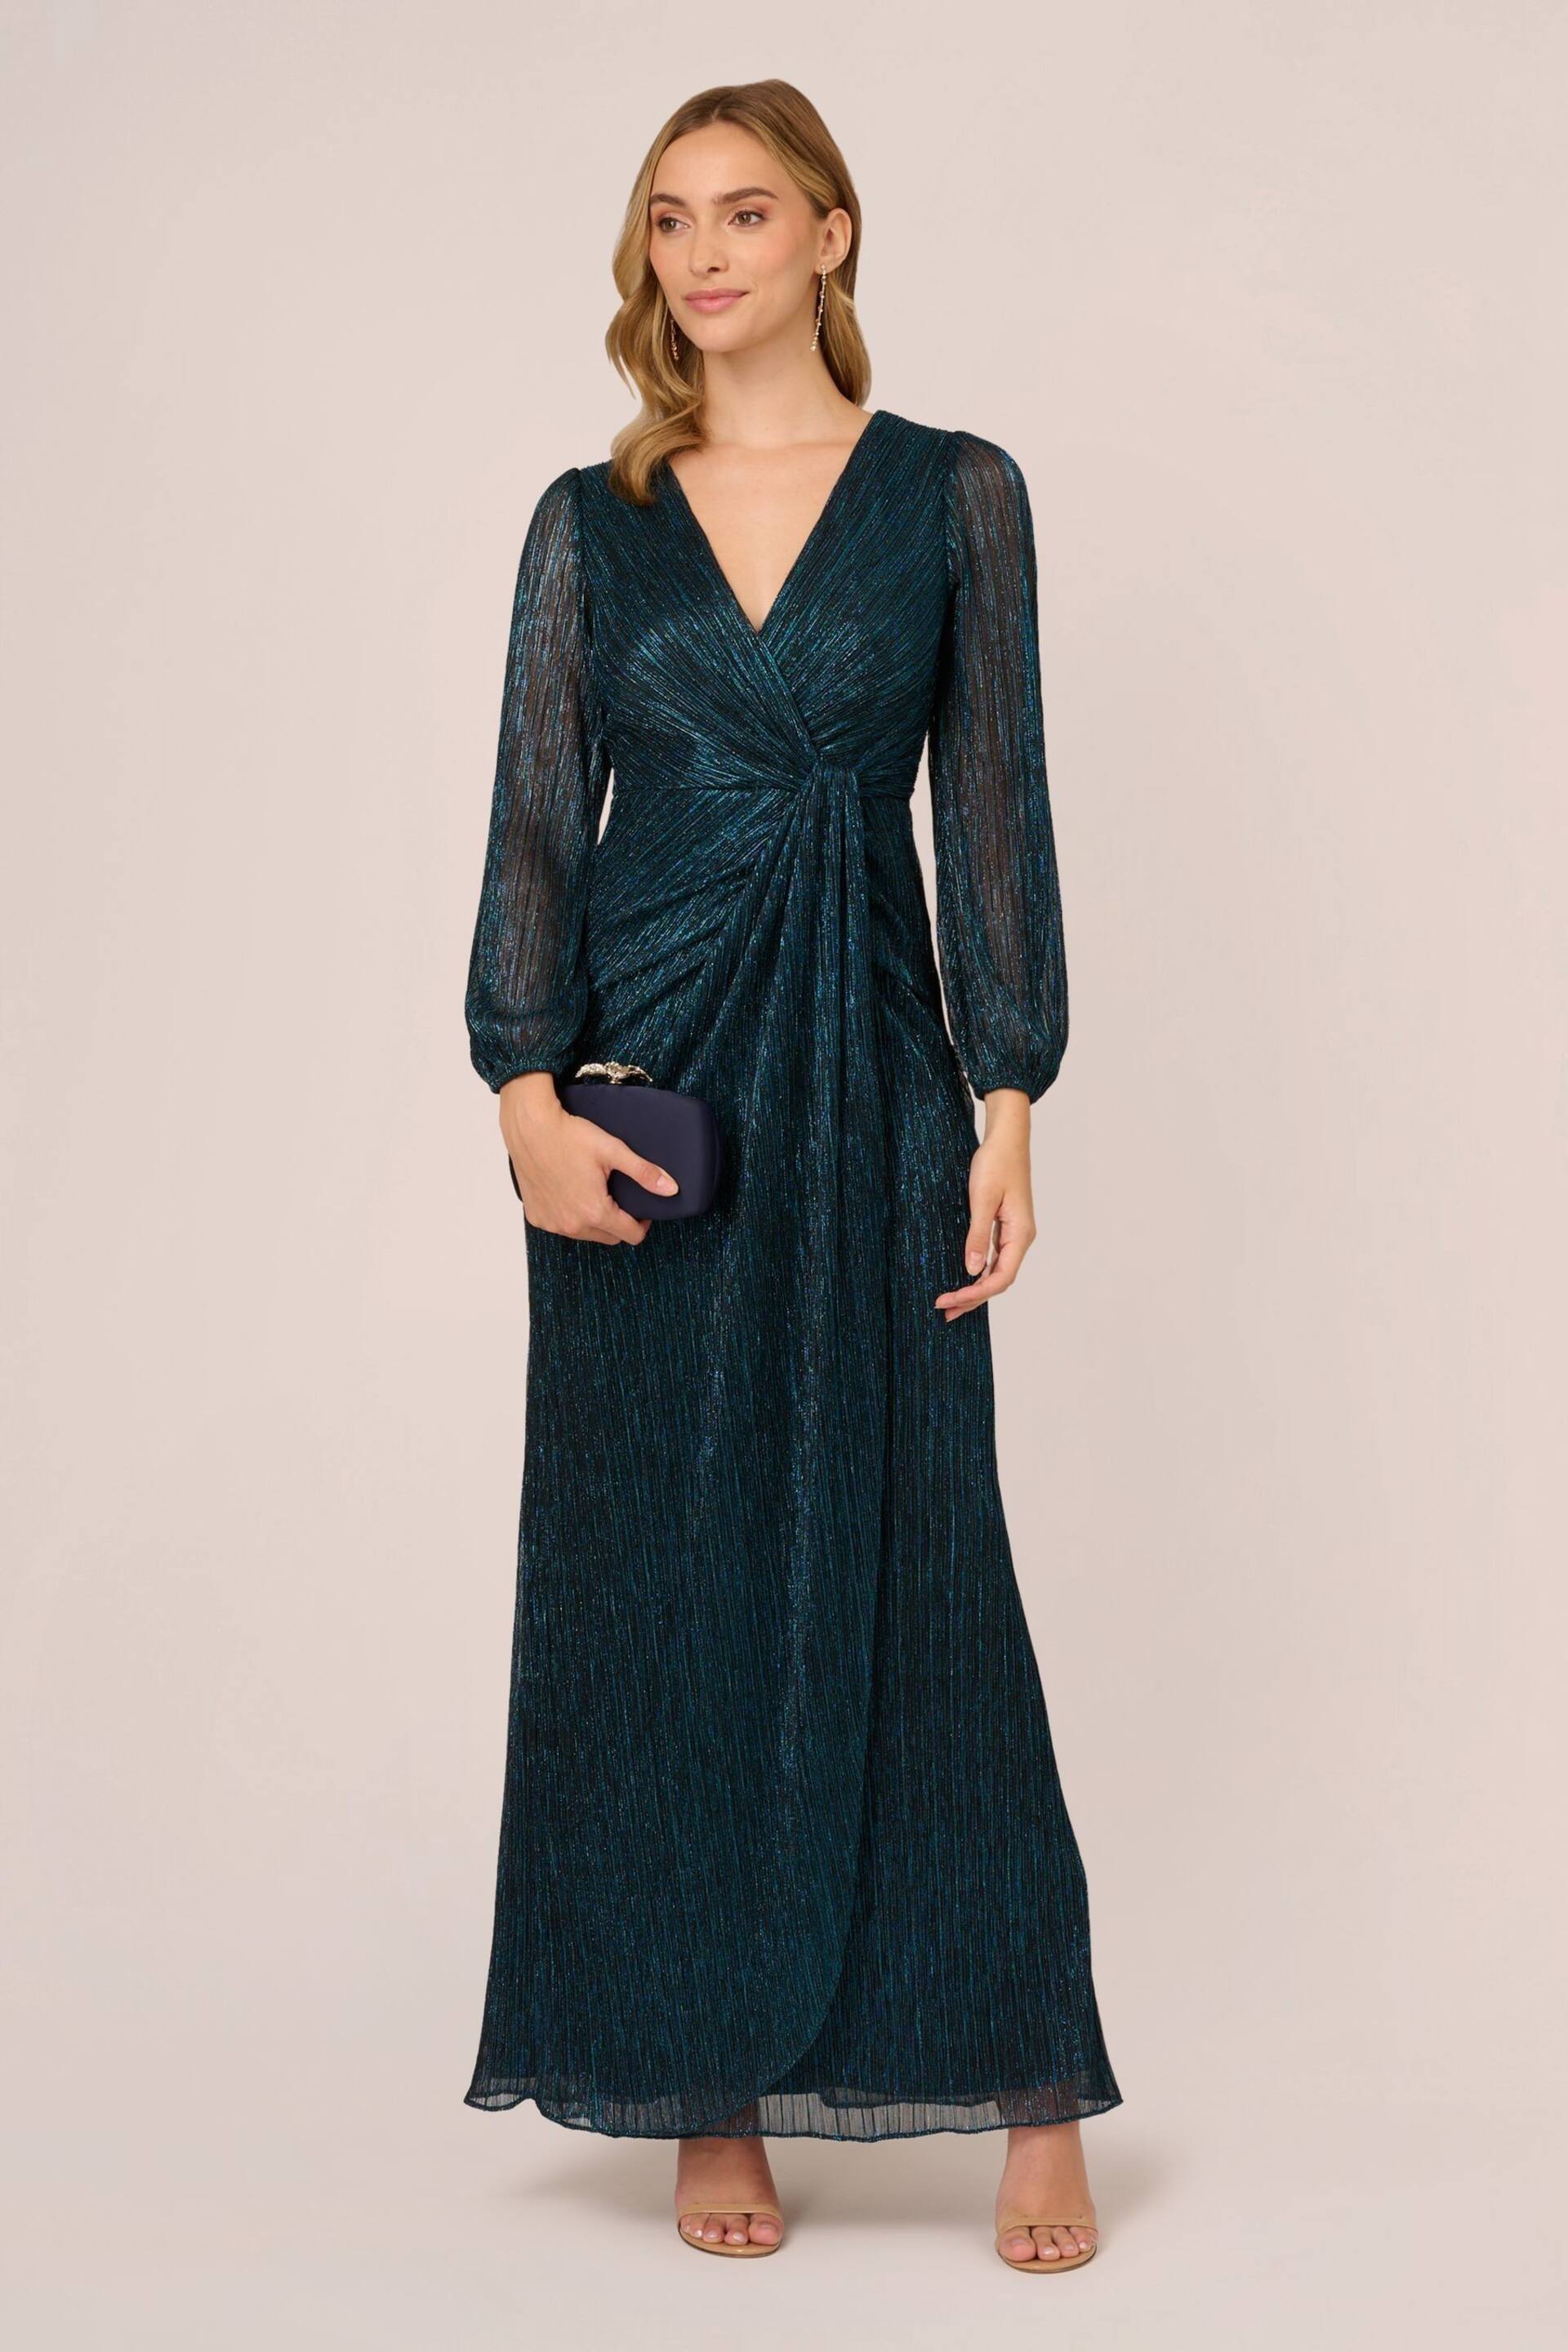 Adrianna Papell Blue Metallic Mesh Draped Gown - Image 3 of 7